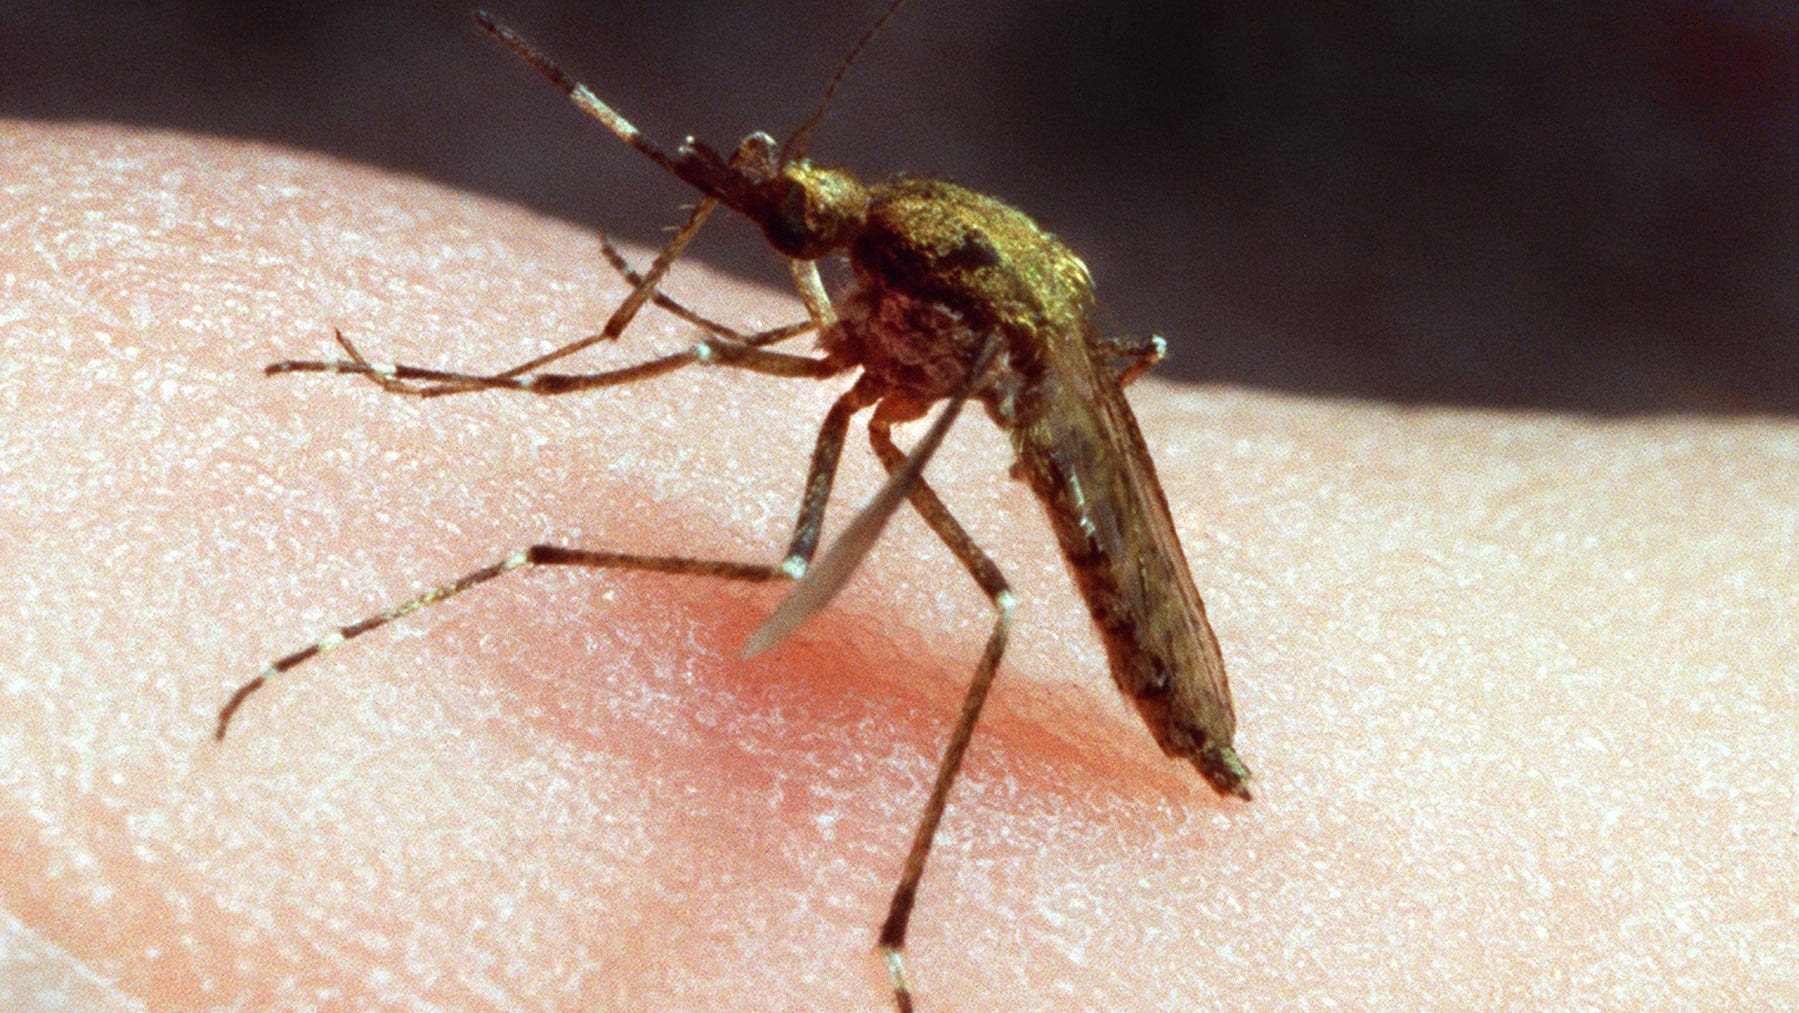 Mosquito bites are a pain. A doctor weighs in on how to ease the discomfort.